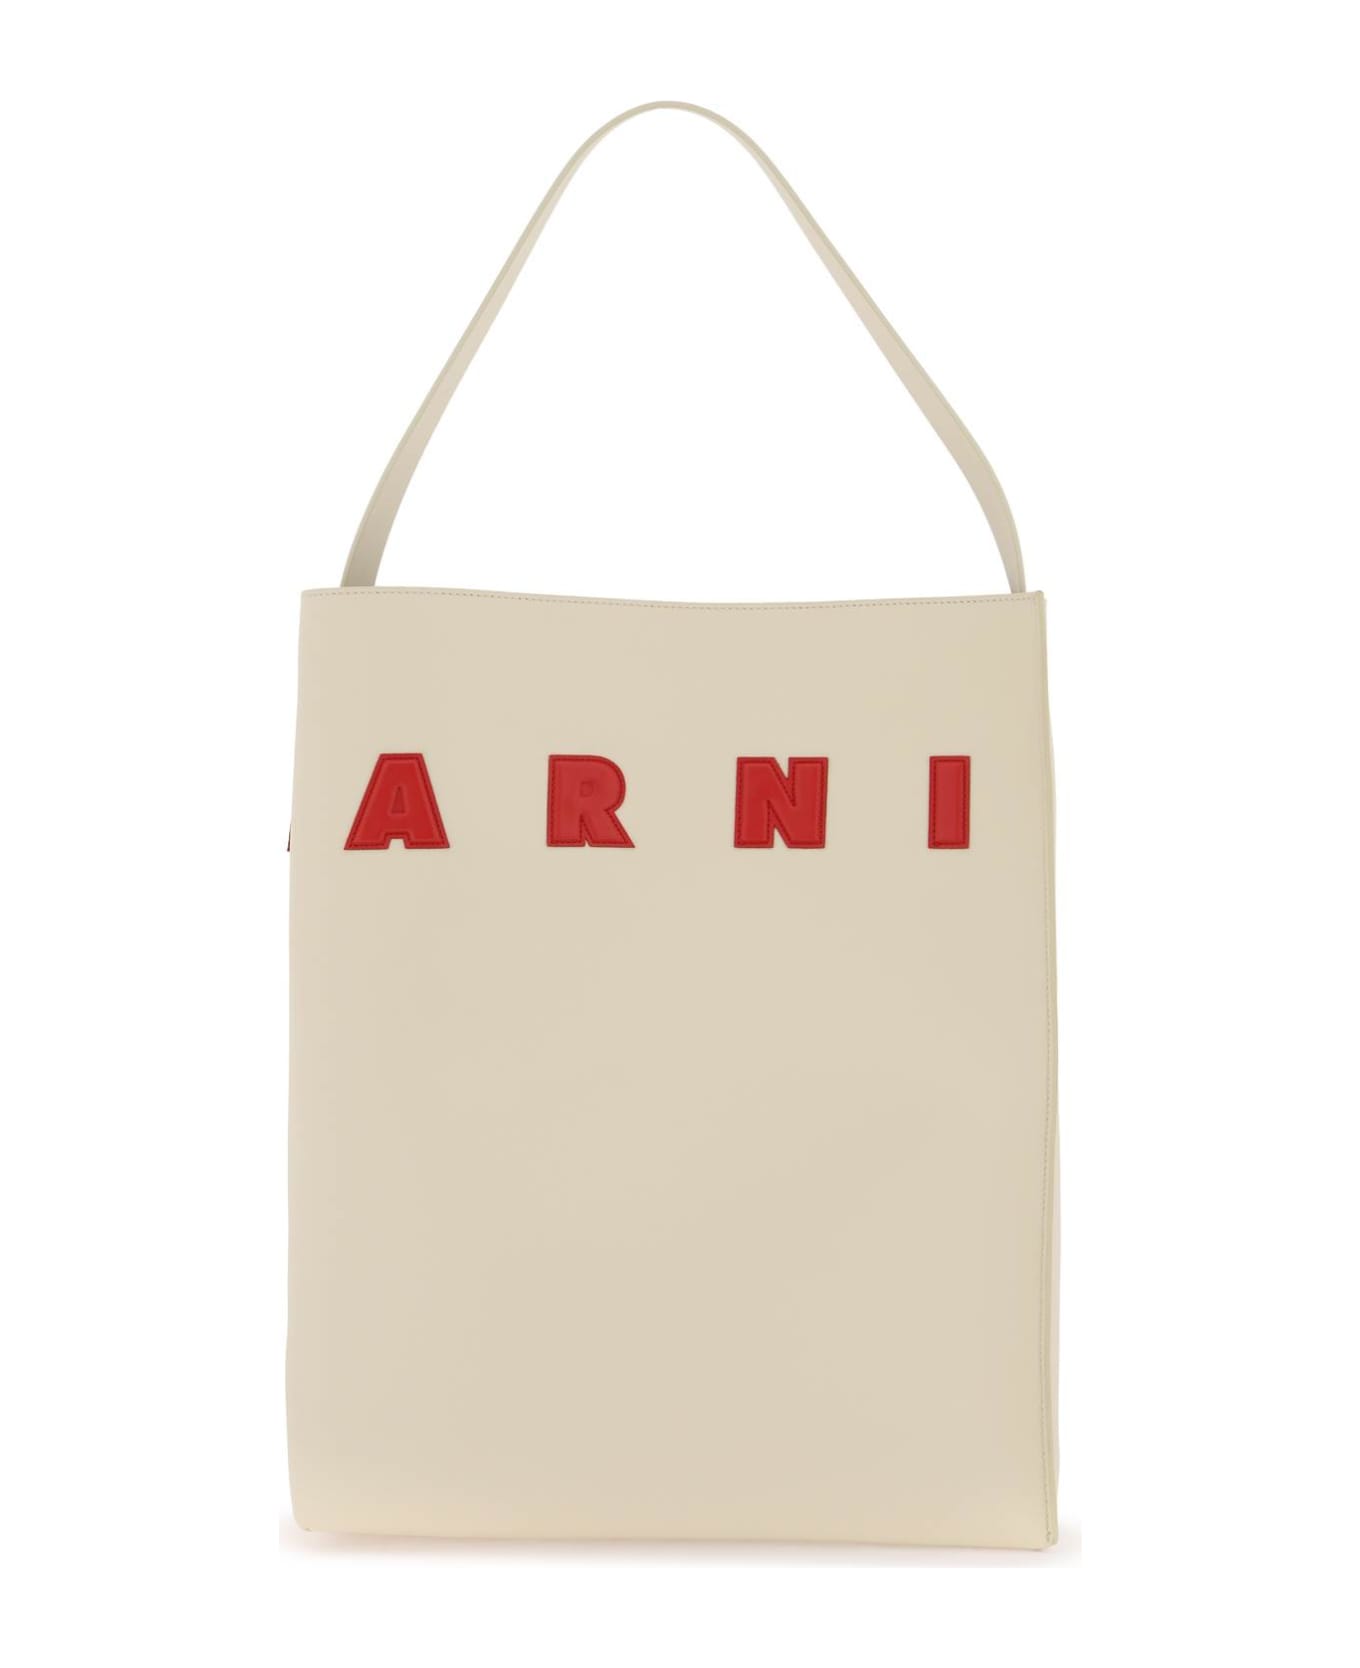 Marni Museo Hobo Bag - IVORY LACQUER (White) バッグ